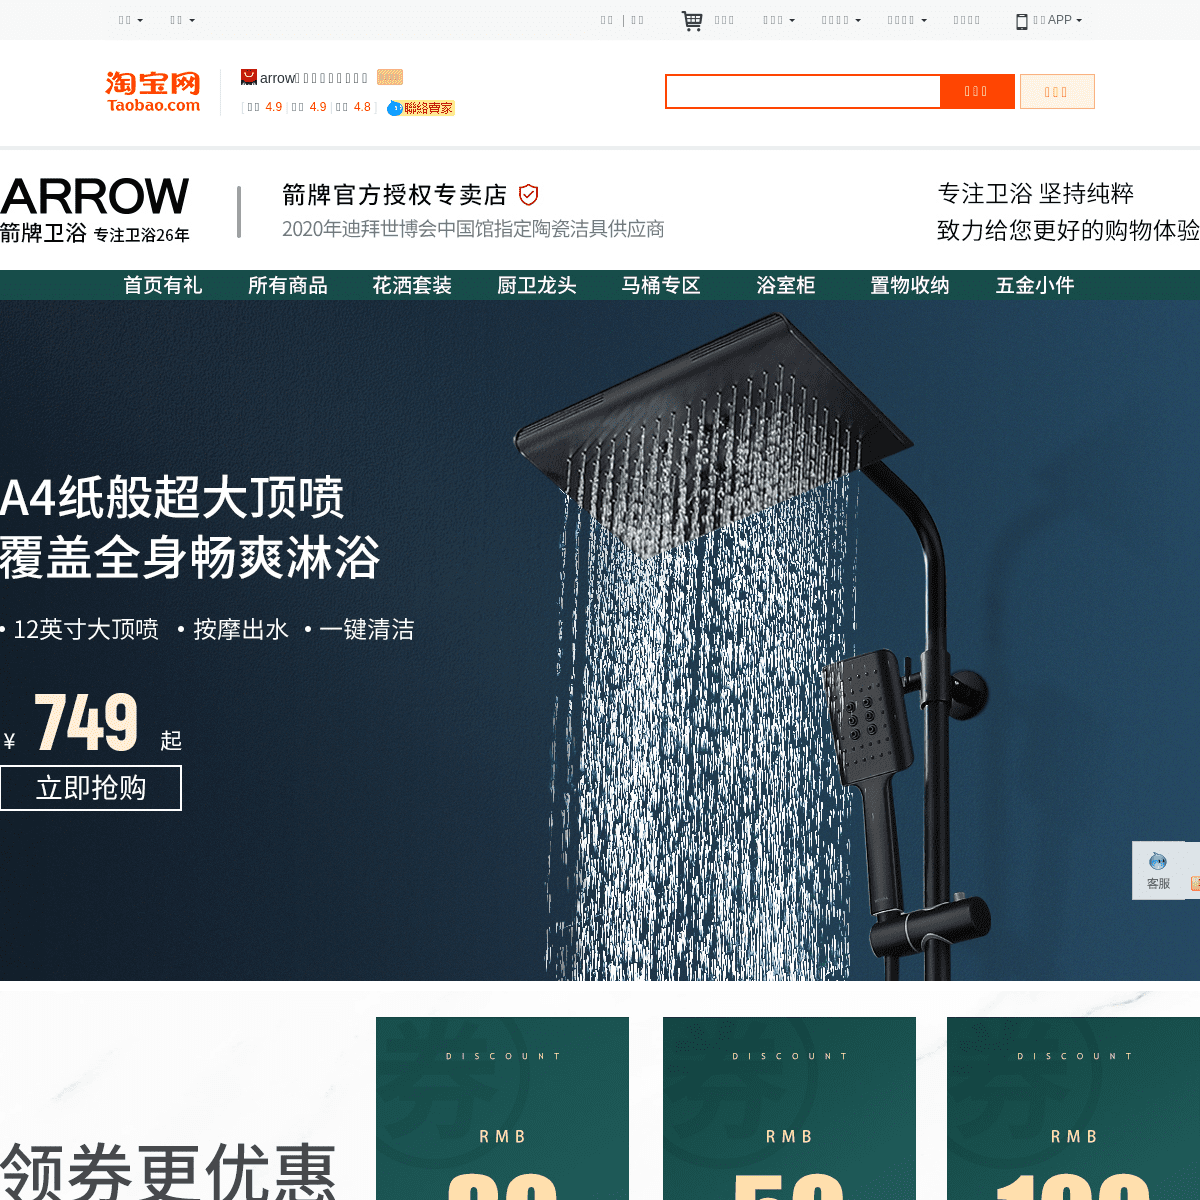 A complete backup of arrowlhhw.tmall.com